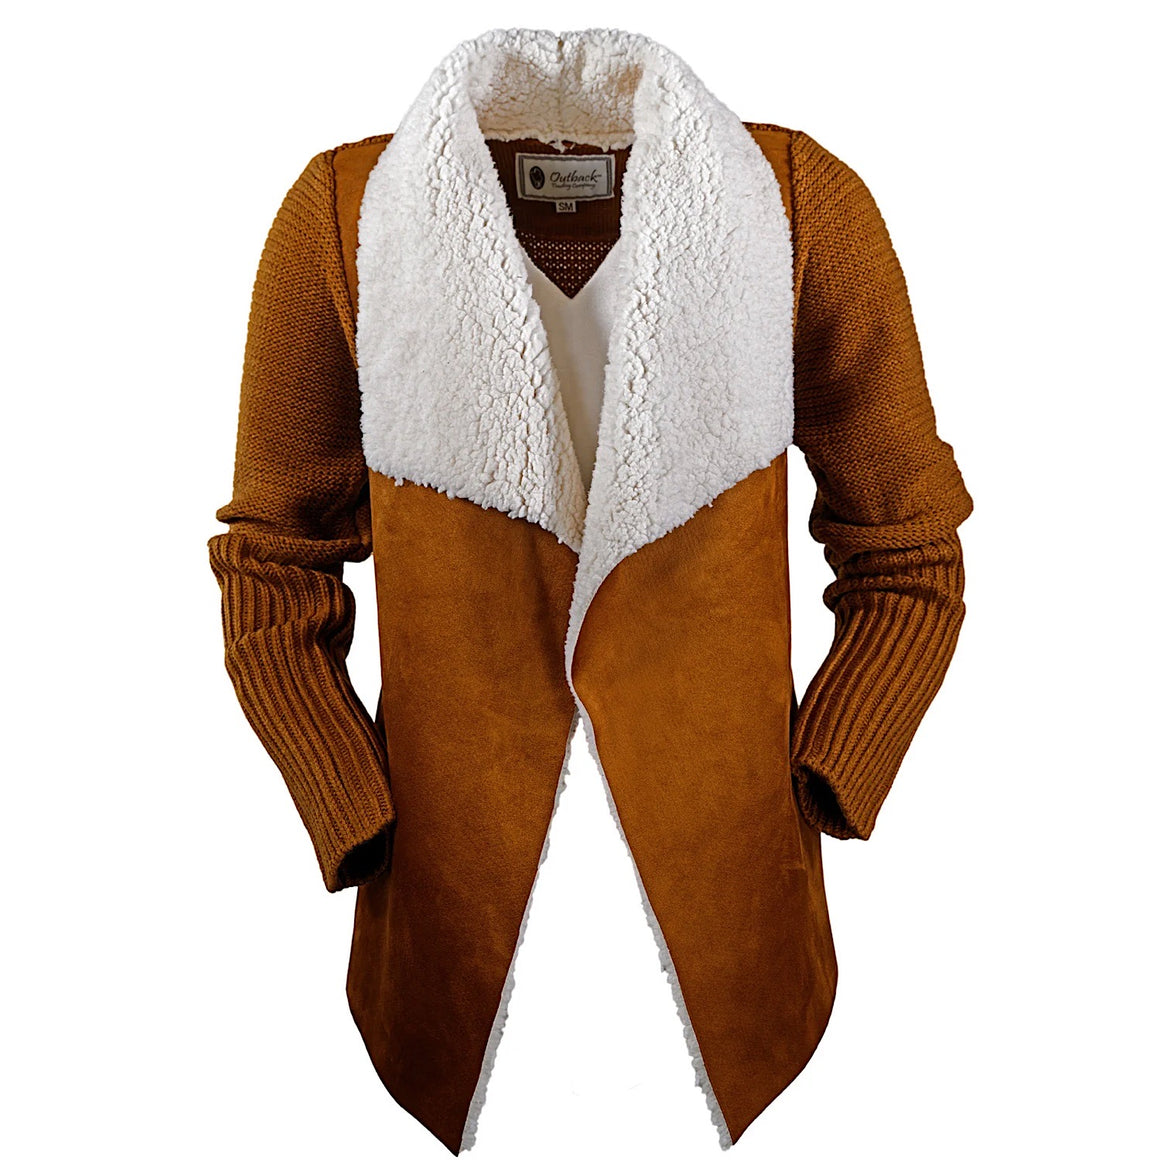 Outback Trading Womens Leia Cardigan Brown